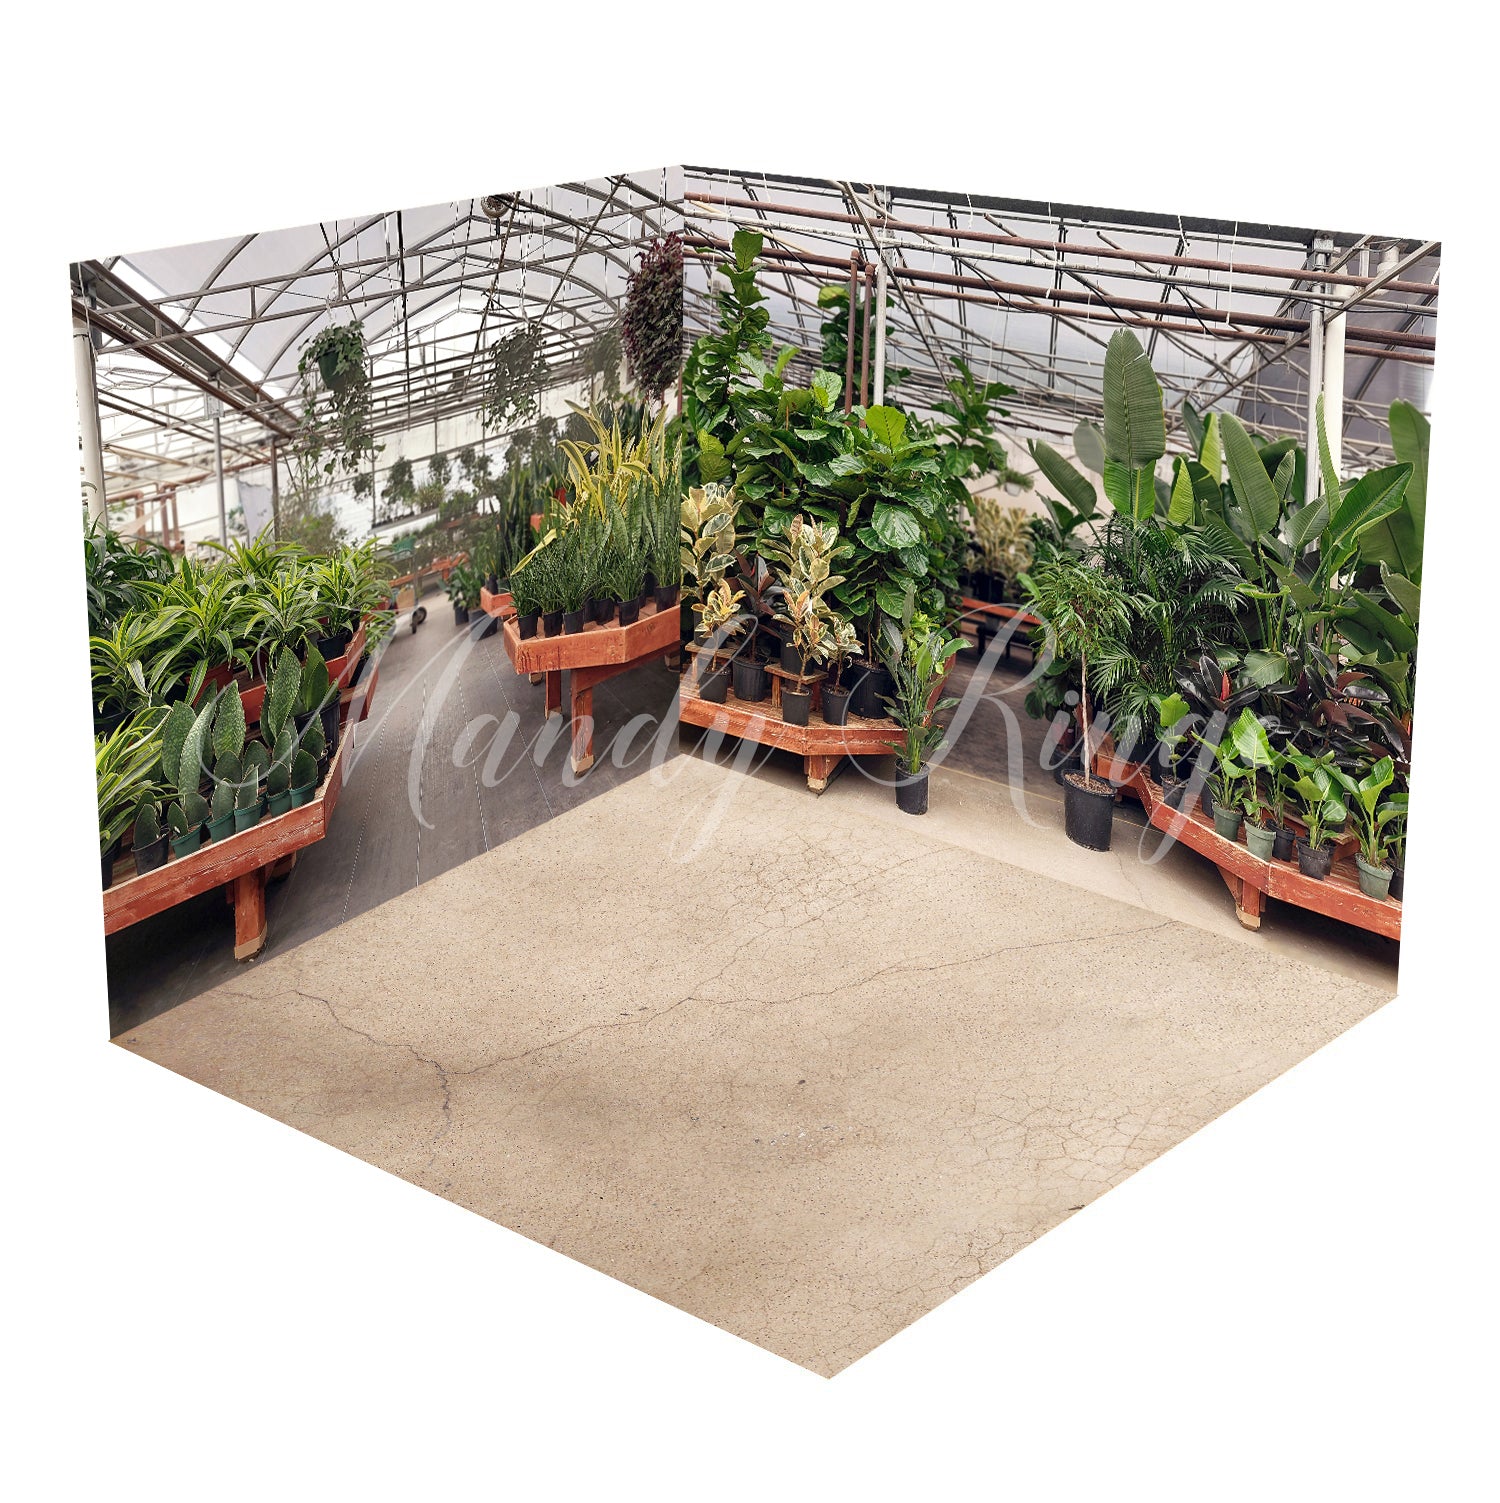 Kate Tropical Greenhouse Interior Summer Plants Room Set(8ftx8ft&10ftx8ft&8ftx10ft)